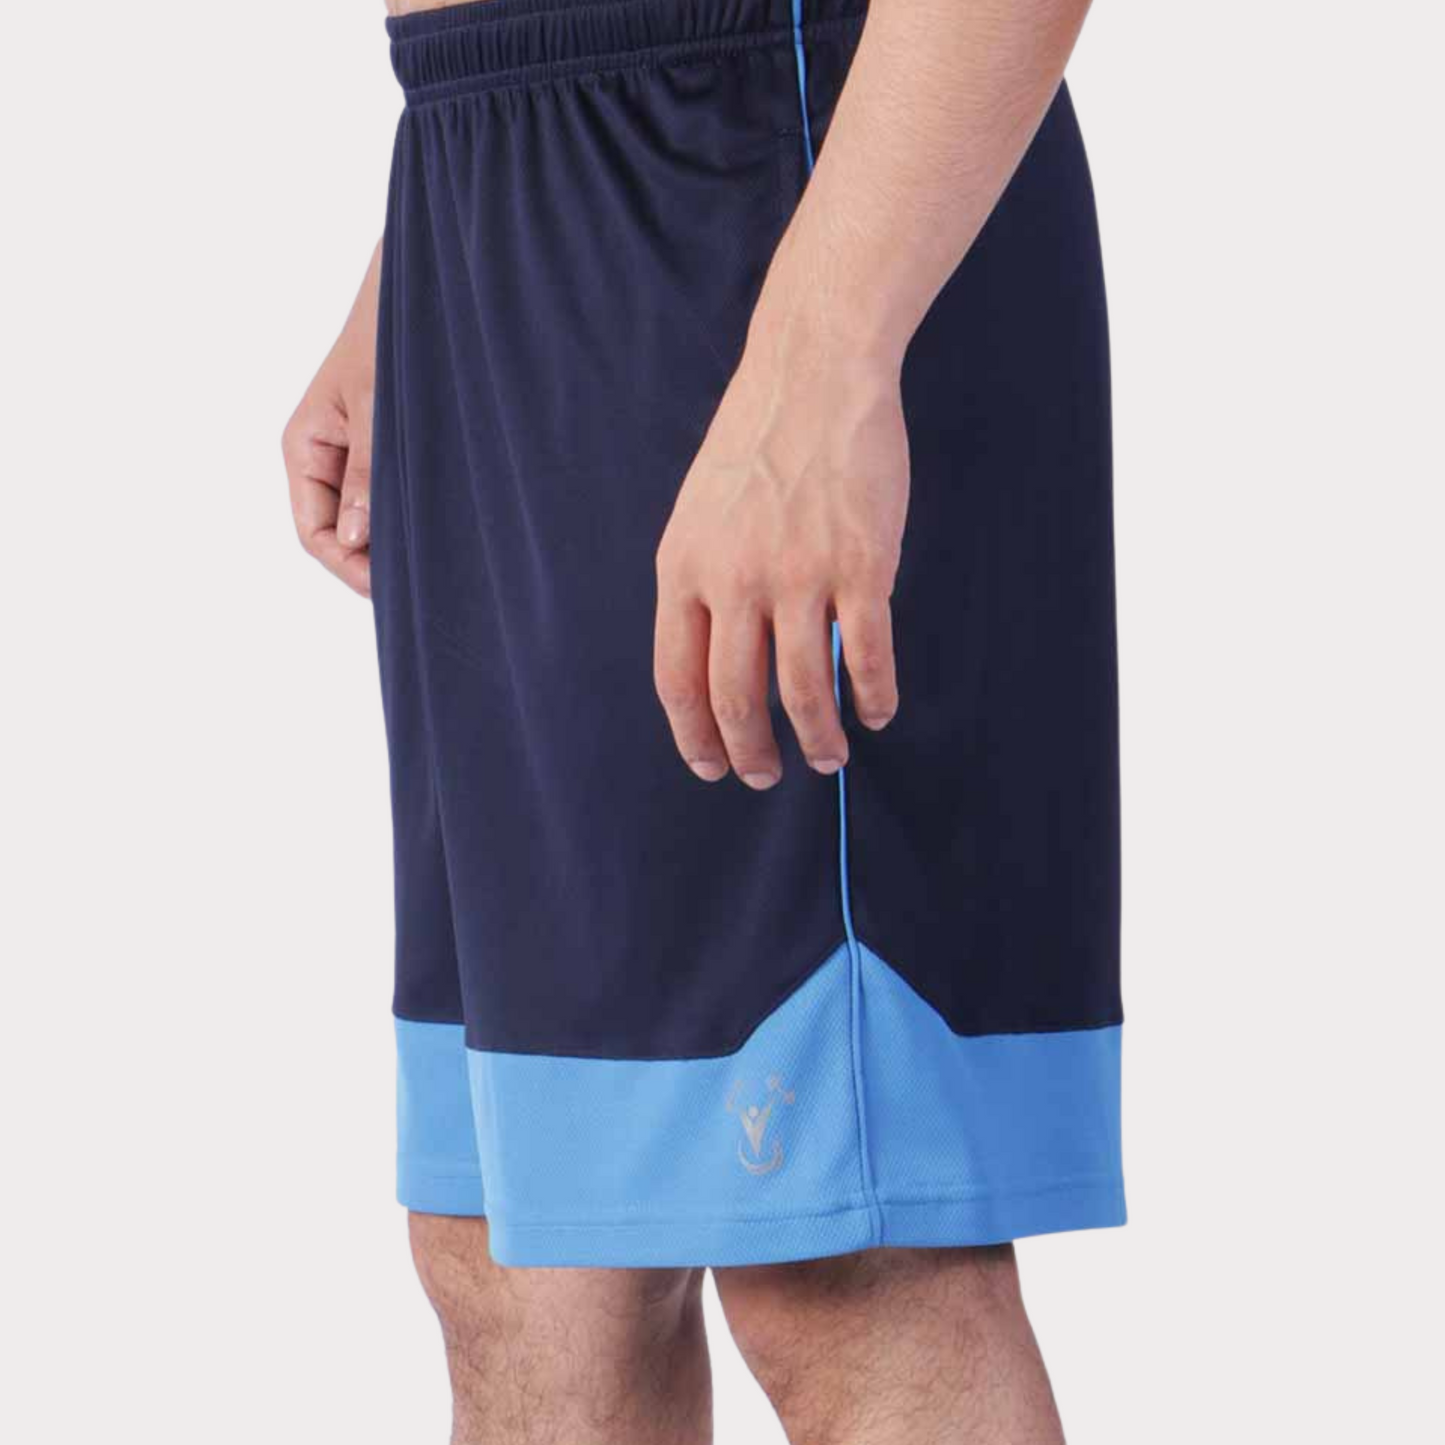 Shorts Activewear / Sportswear - Men's Classic Textured Loose Fit Shorts - S / Xavier Navy - Outperformer